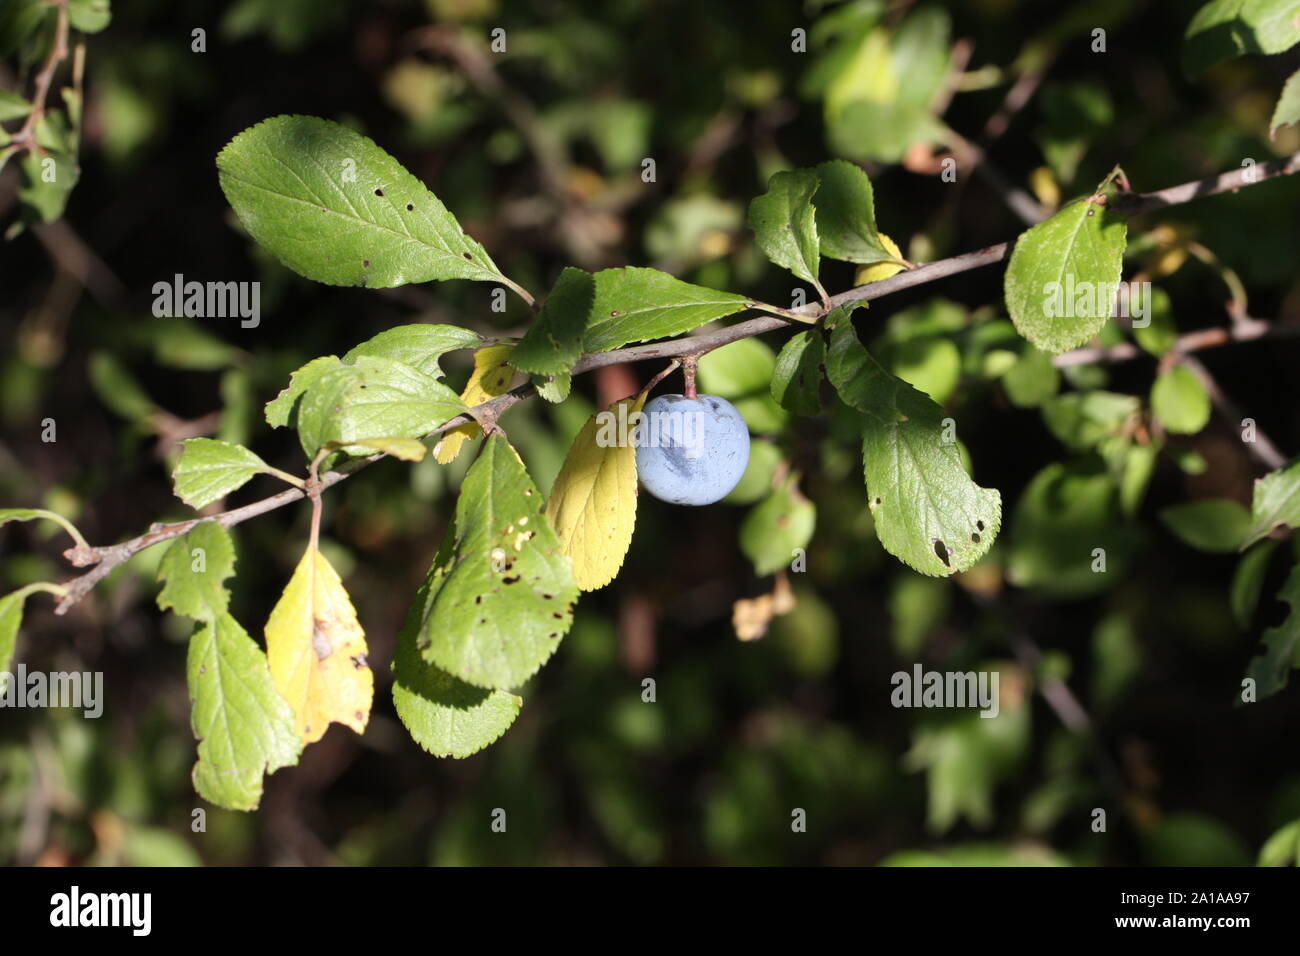 A single Blackthorn Berry between leaves Stock Photo